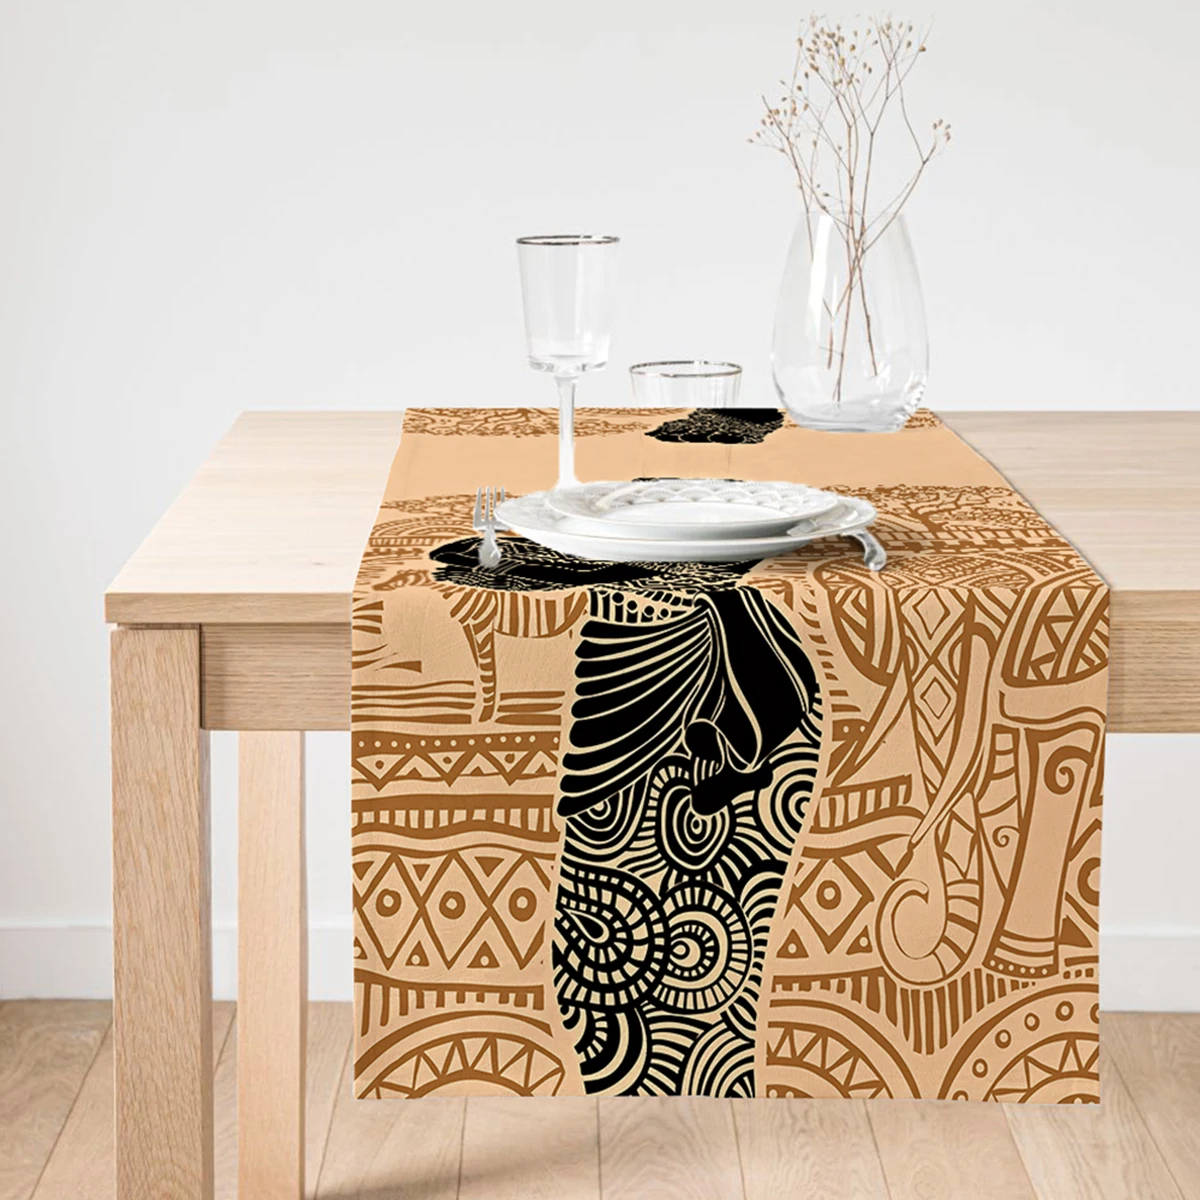 

Ethnic Pattern Background African Woman Motif Decorative Suede Runner,Decorative Runner,Gift Runner,Table Decoration